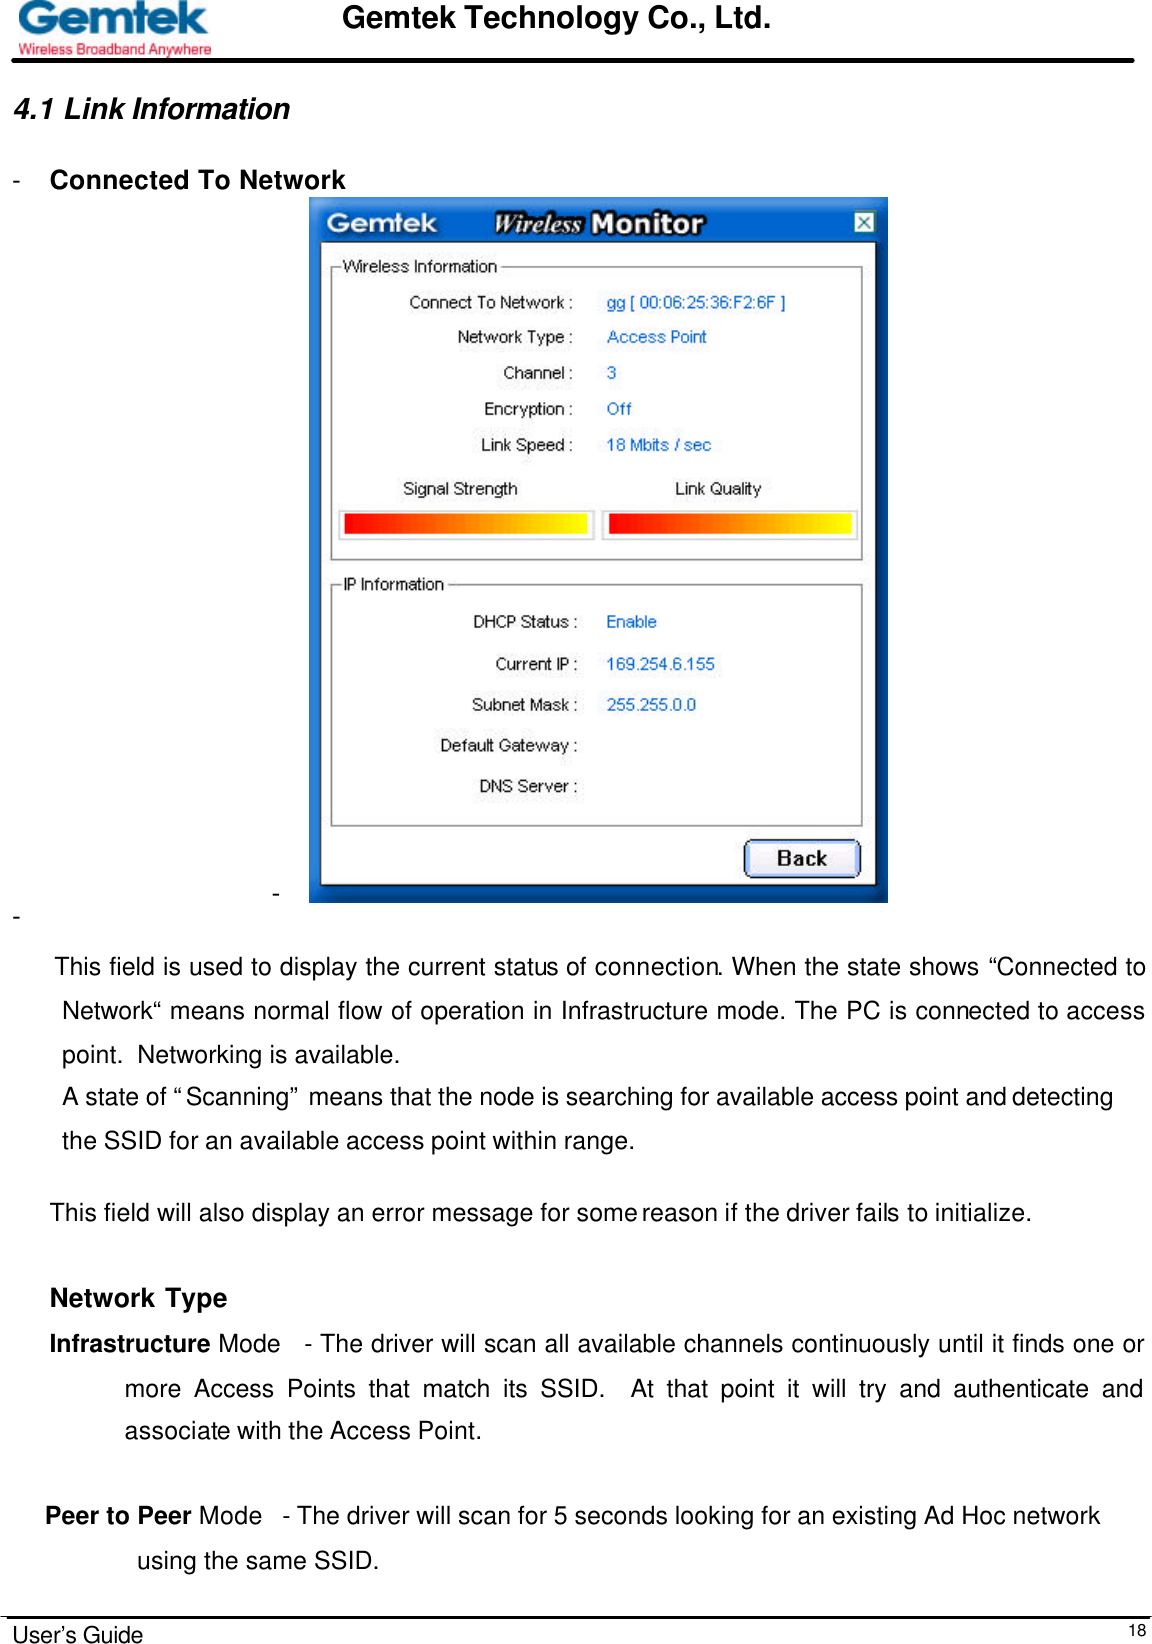                                                                                                                                                                                                                                                                      User’s Guide  18Gemtek Technology Co., Ltd.4.1 Link Information  - Connected To Network -  -   This field is used to display the current status of connection. When the state shows “Connected to Network“ means normal flow of operation in Infrastructure mode. The PC is connected to access point.  Networking is available.  A state of “Scanning” means that the node is searching for available access point and detecting  the SSID for an available access point within range.  This field will also display an error message for some reason if the driver fails to initialize.   Network Type Infrastructure Mode   - The driver will scan all available channels continuously until it finds one or more Access Points that match its SSID.  At that point it will try and authenticate and associate with the Access Point.       Peer to Peer Mode   - The driver will scan for 5 seconds looking for an existing Ad Hoc network      using the same SSID.    